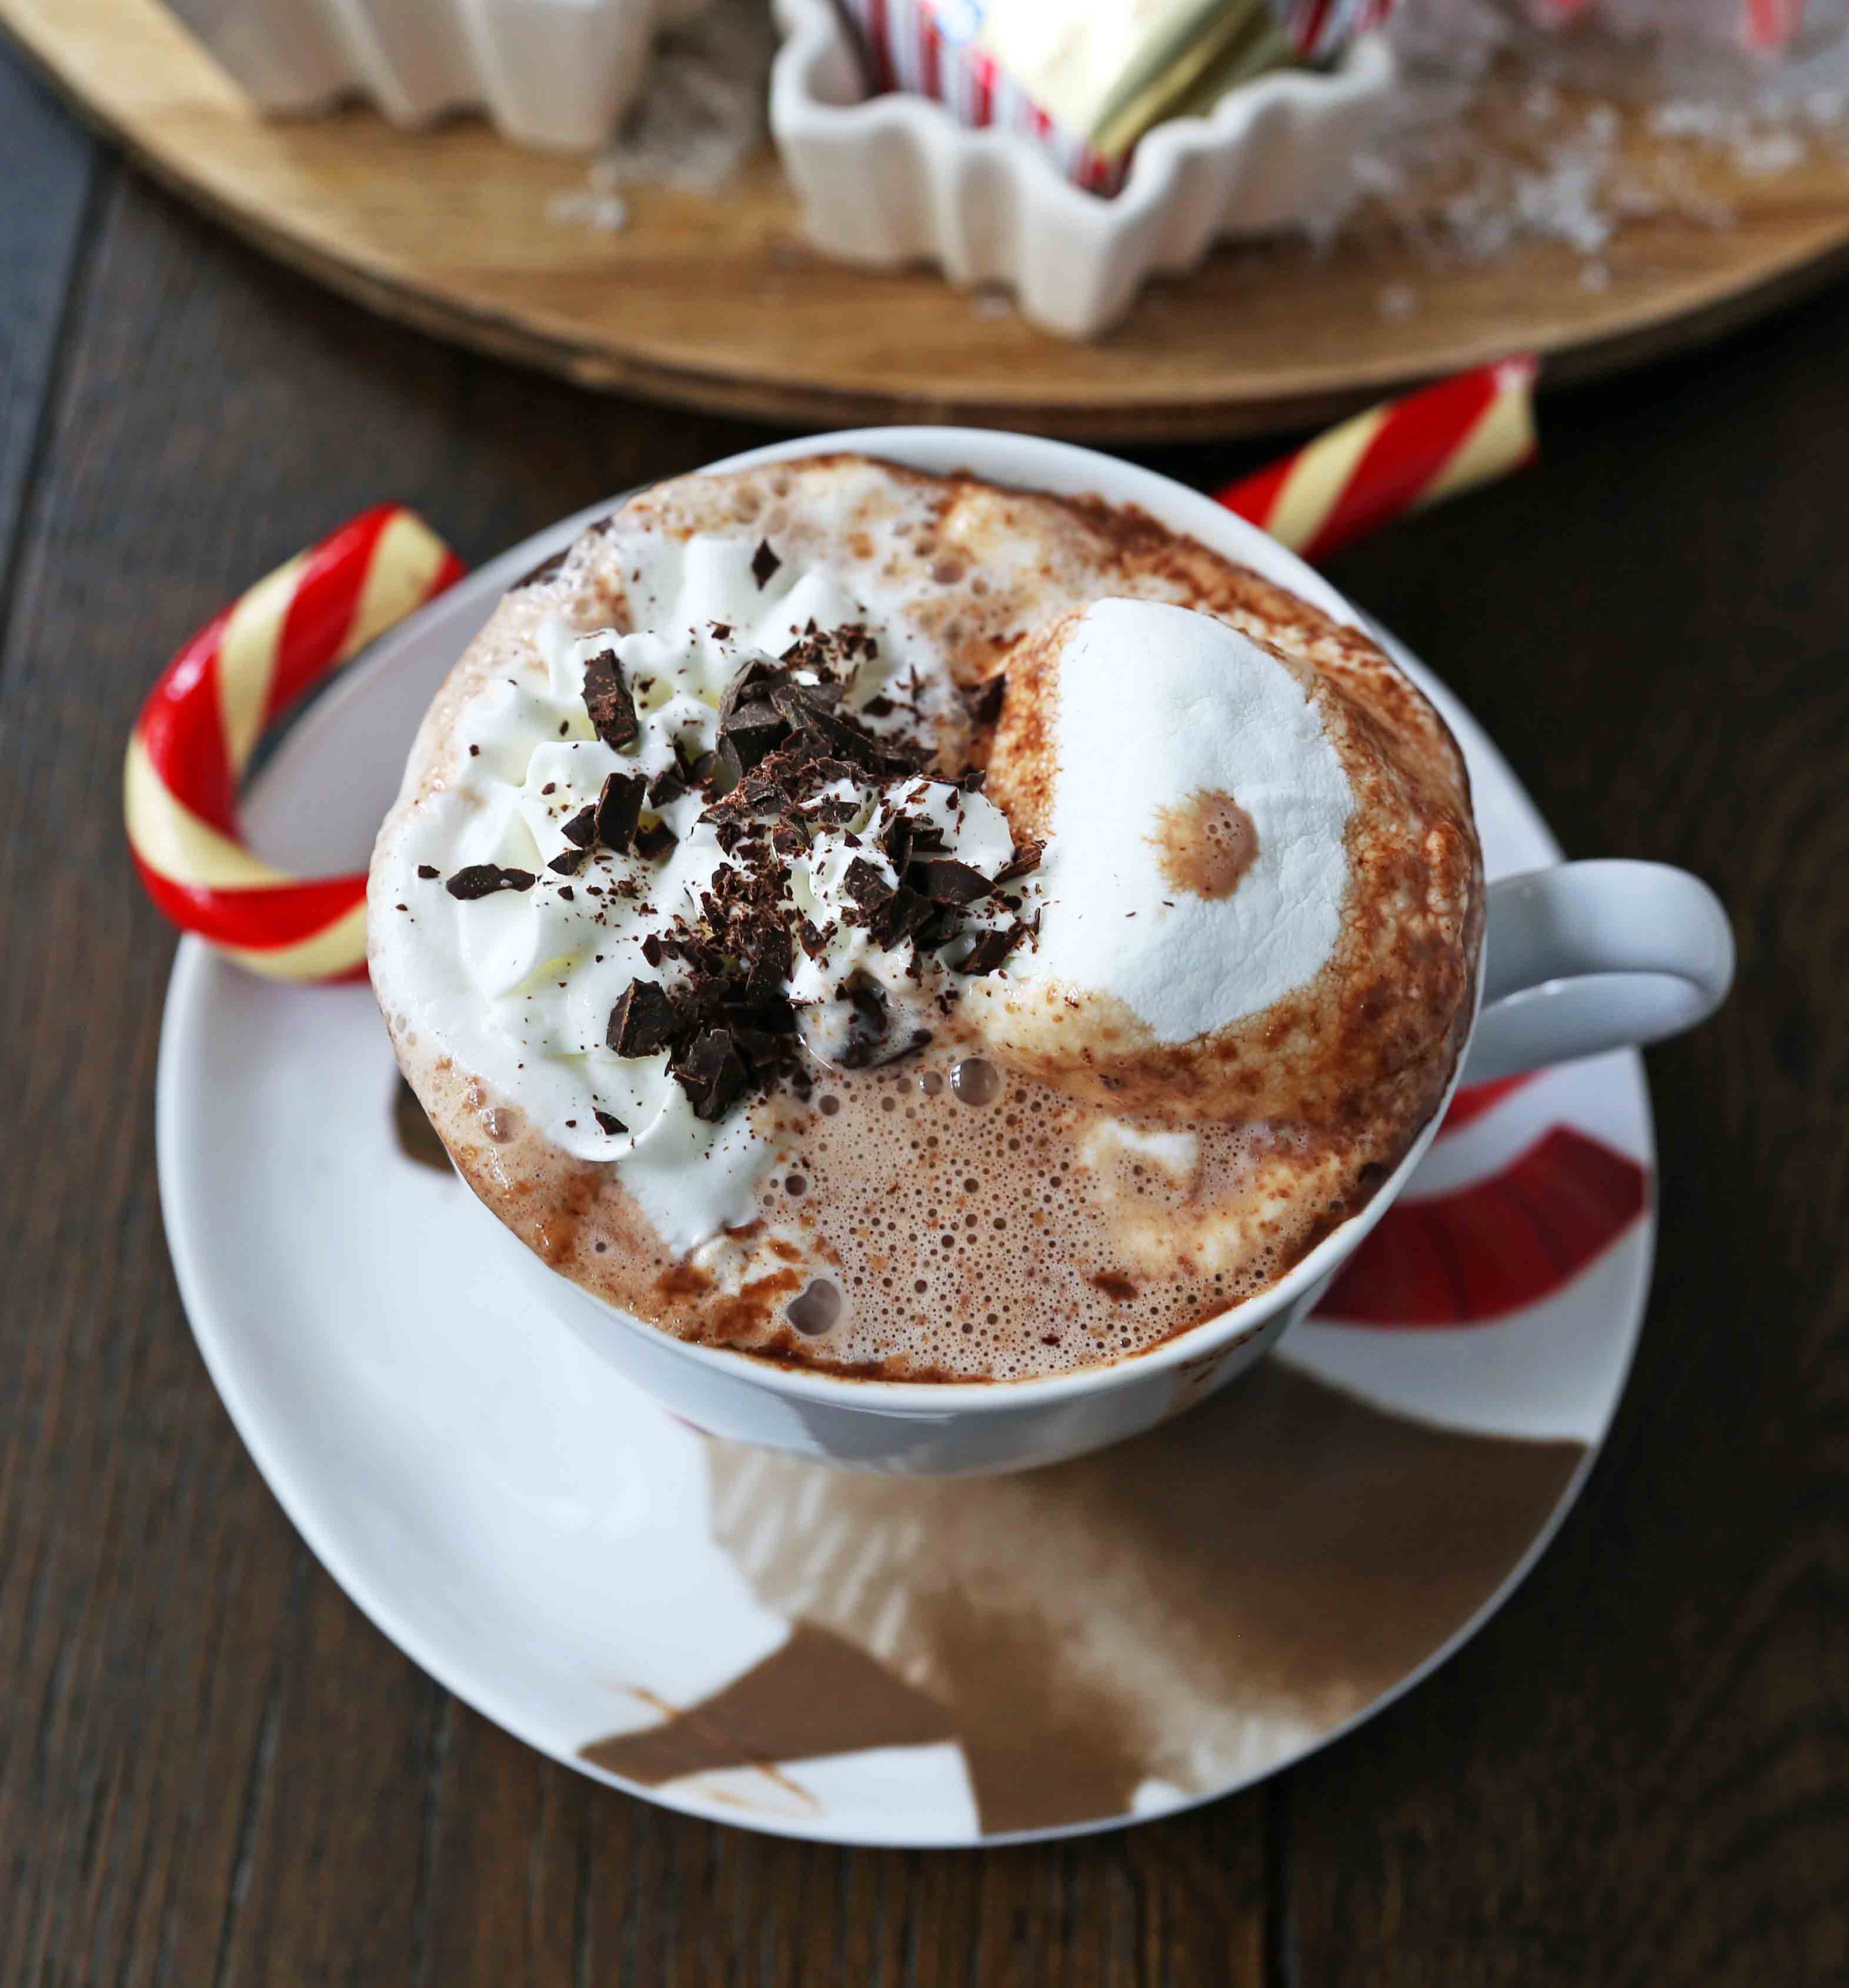 Easy Homemade Hot Chocolate In A Slow Cooker